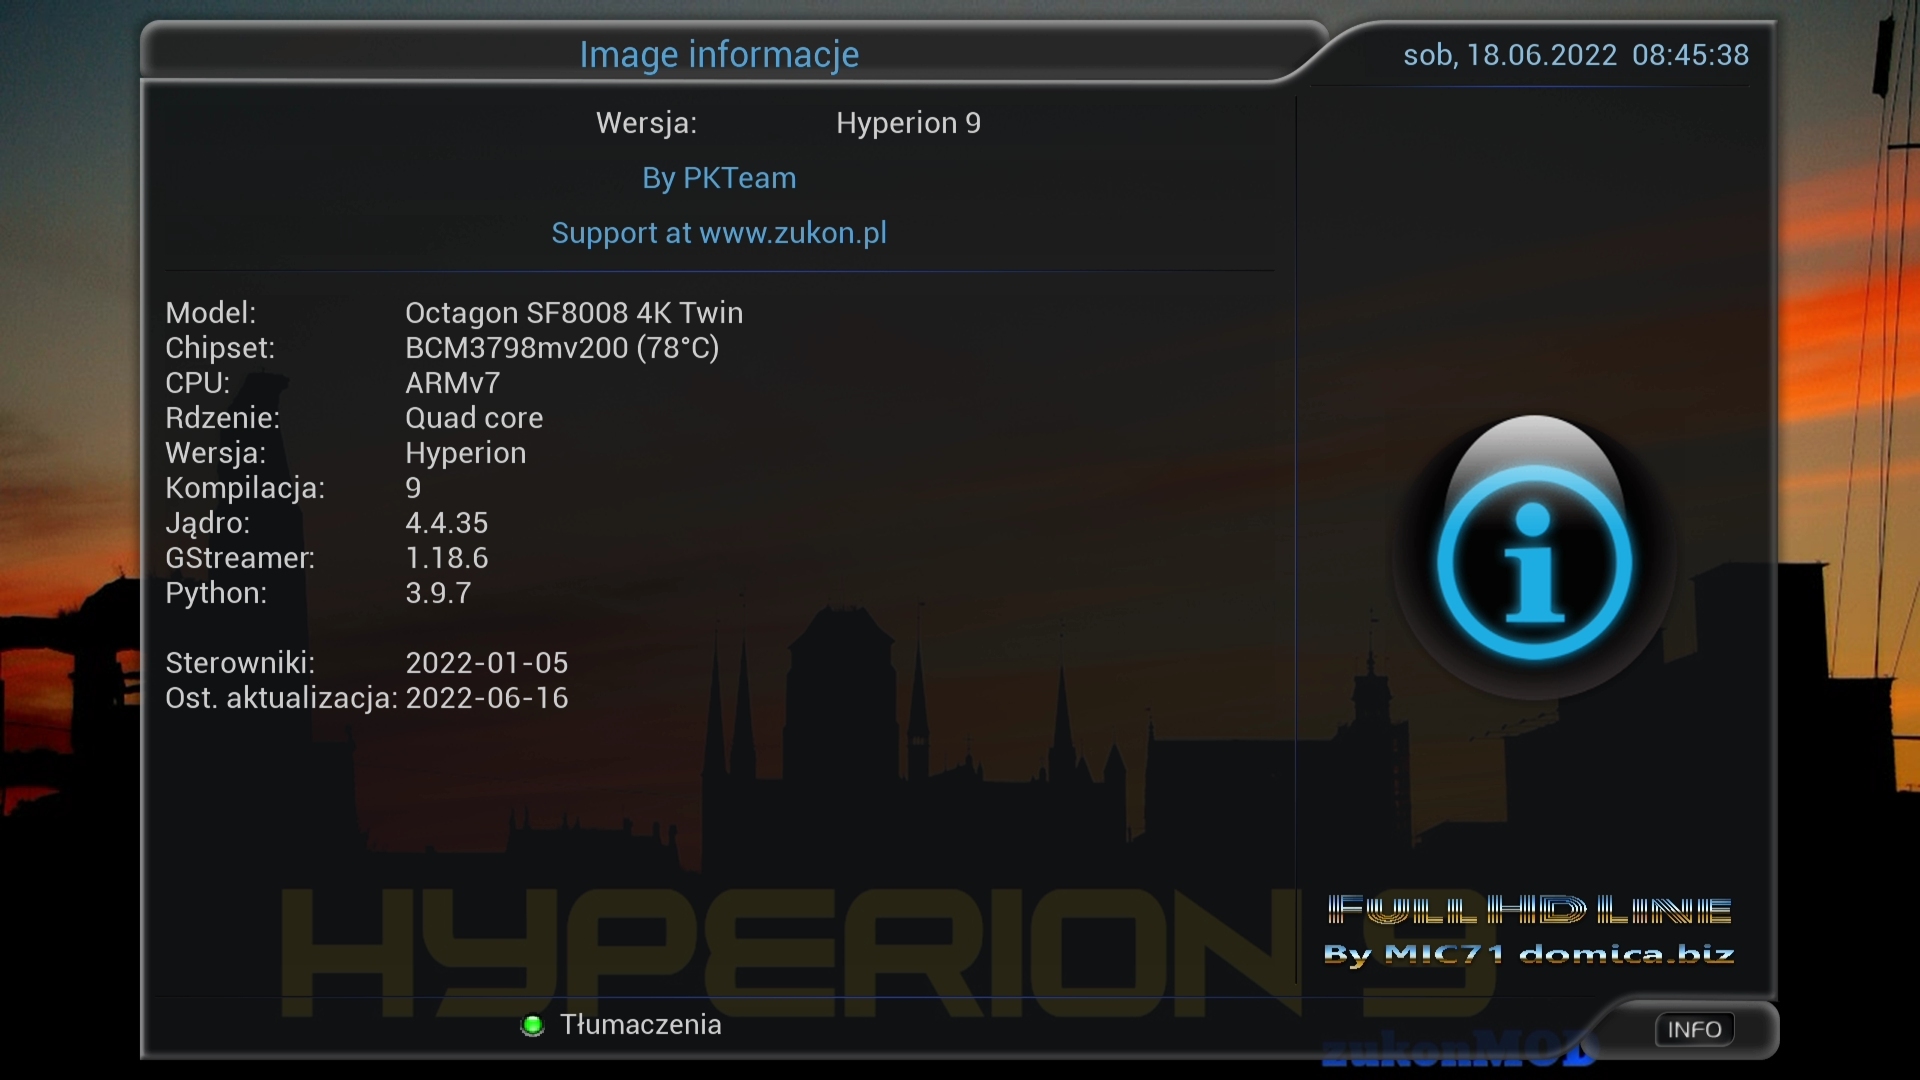  Hyperion  Octagon sf8008